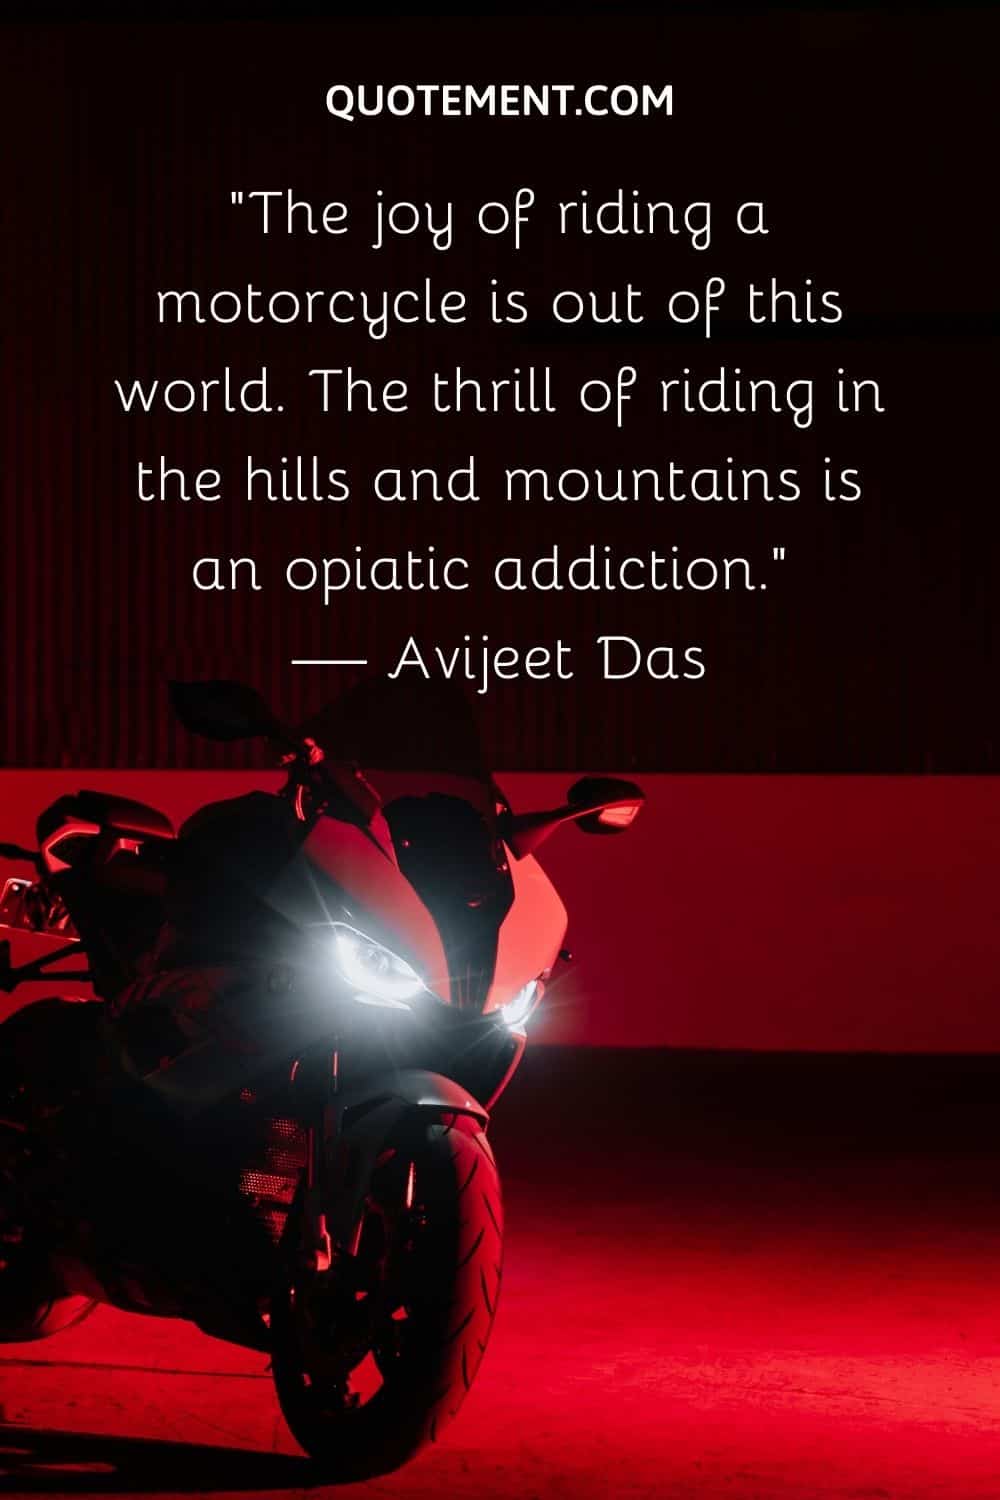 The joy of riding a motorcycle is out of this world.